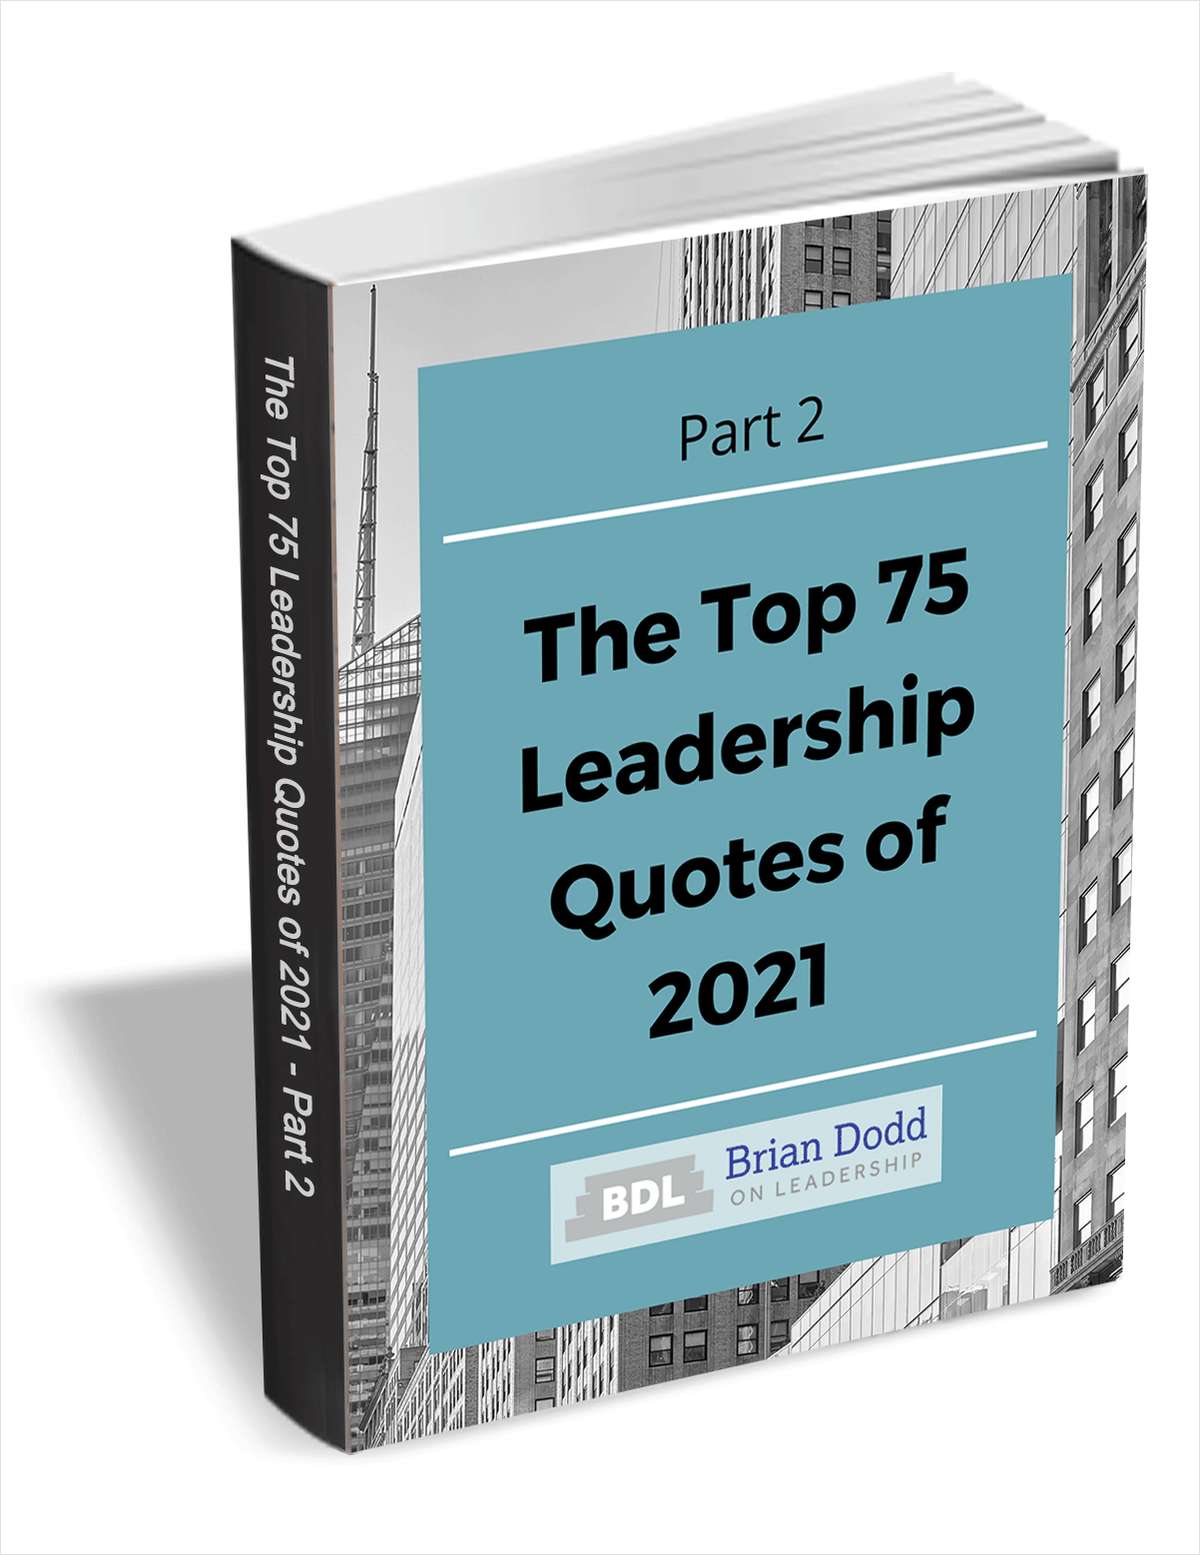 The Top 75 Leadership Quotes Of 2021 - Part 2